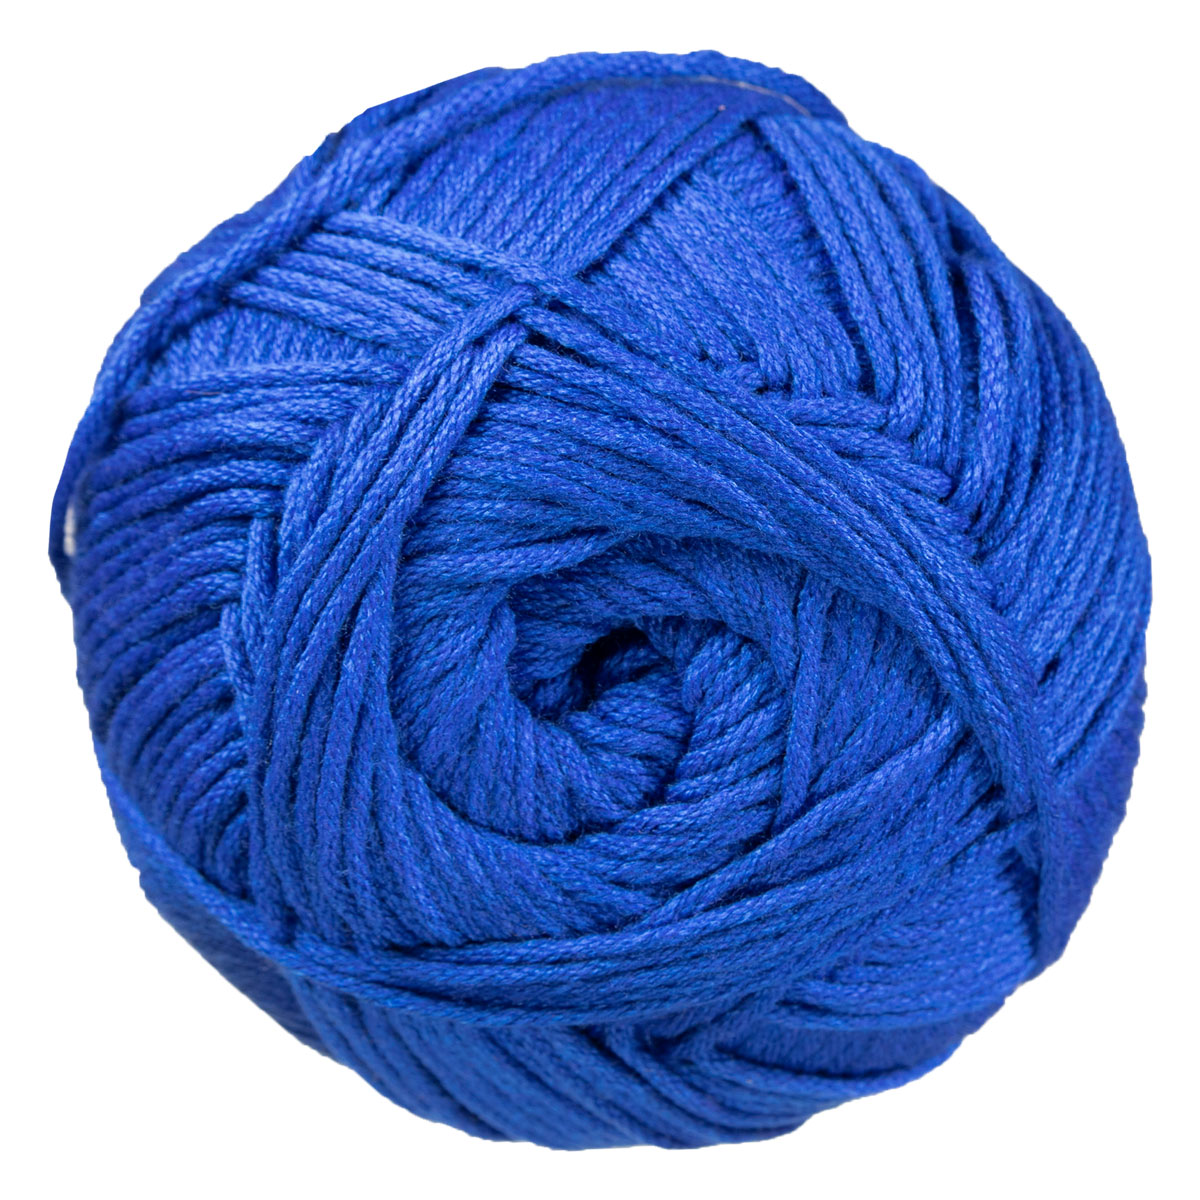 Berroco Comfort Yarn - 9736 Primary Blue at Jimmy Beans Wool